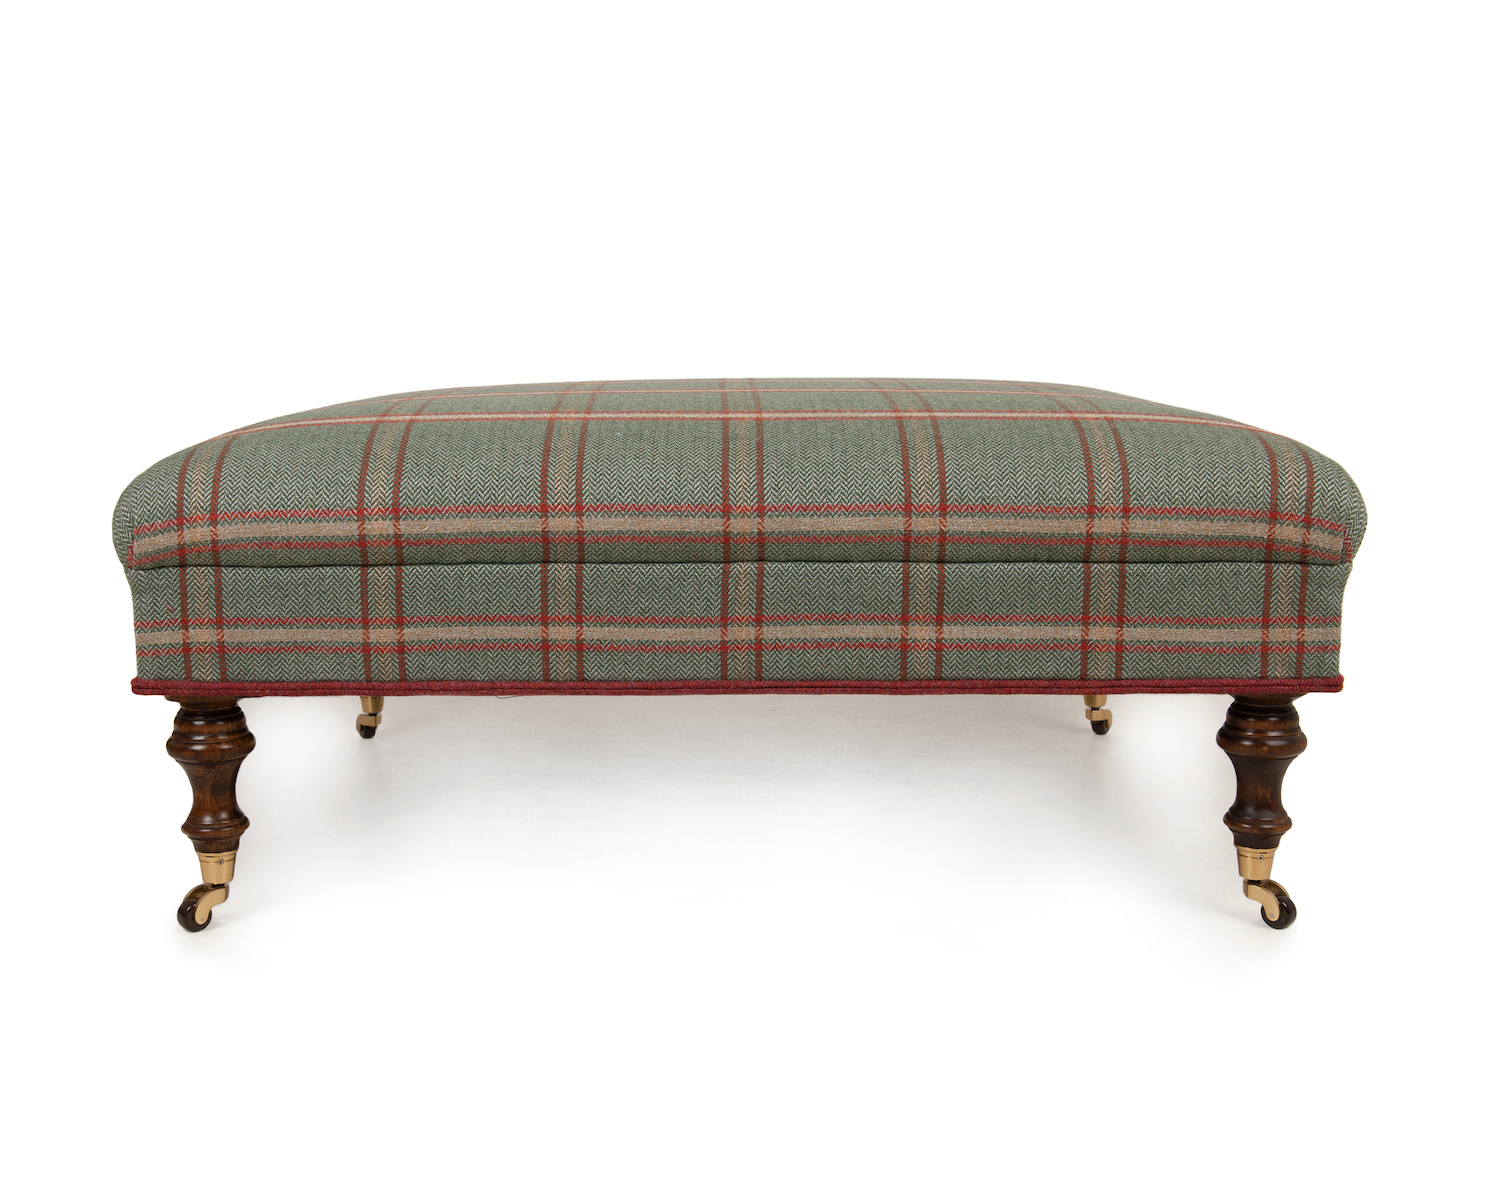 Classic Plaid Roll Top Footstool with Double Piping Trim